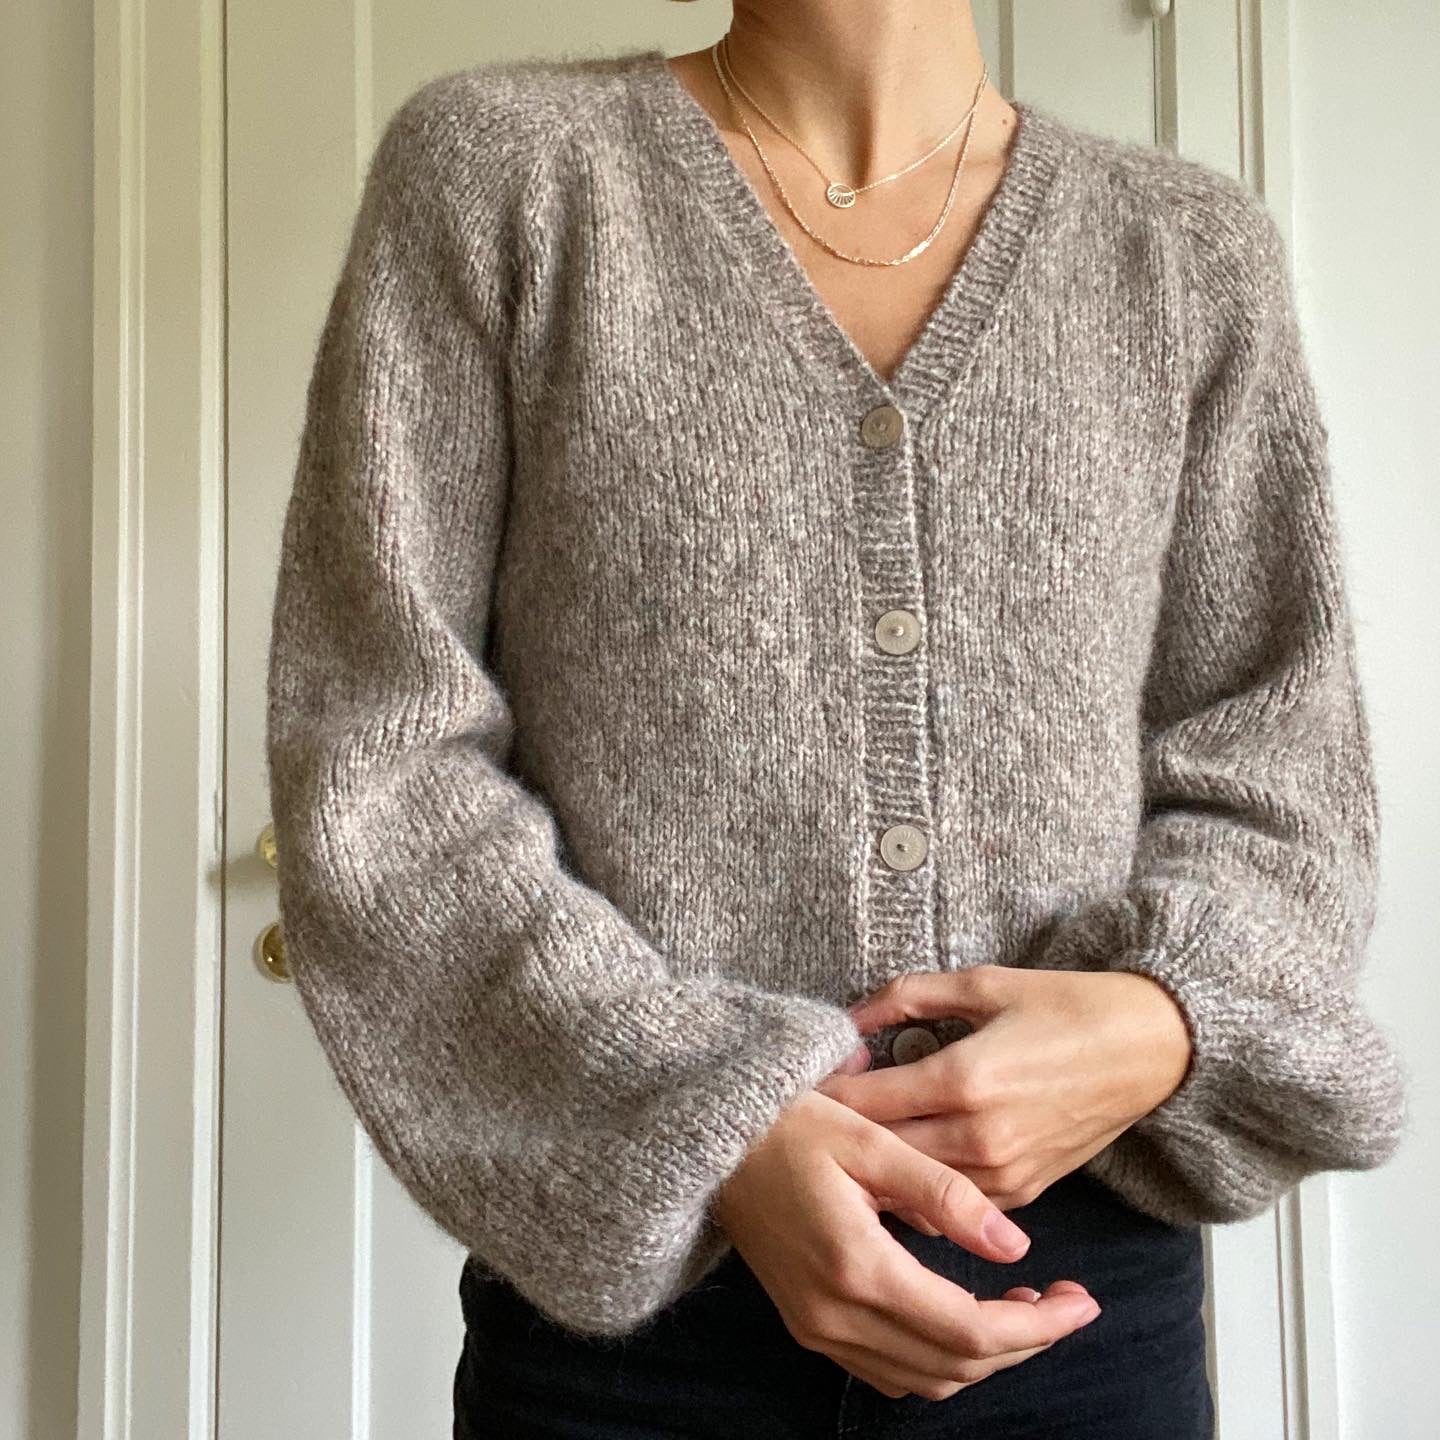 knitting THAT cloud cardigan for $10 ☁️💅